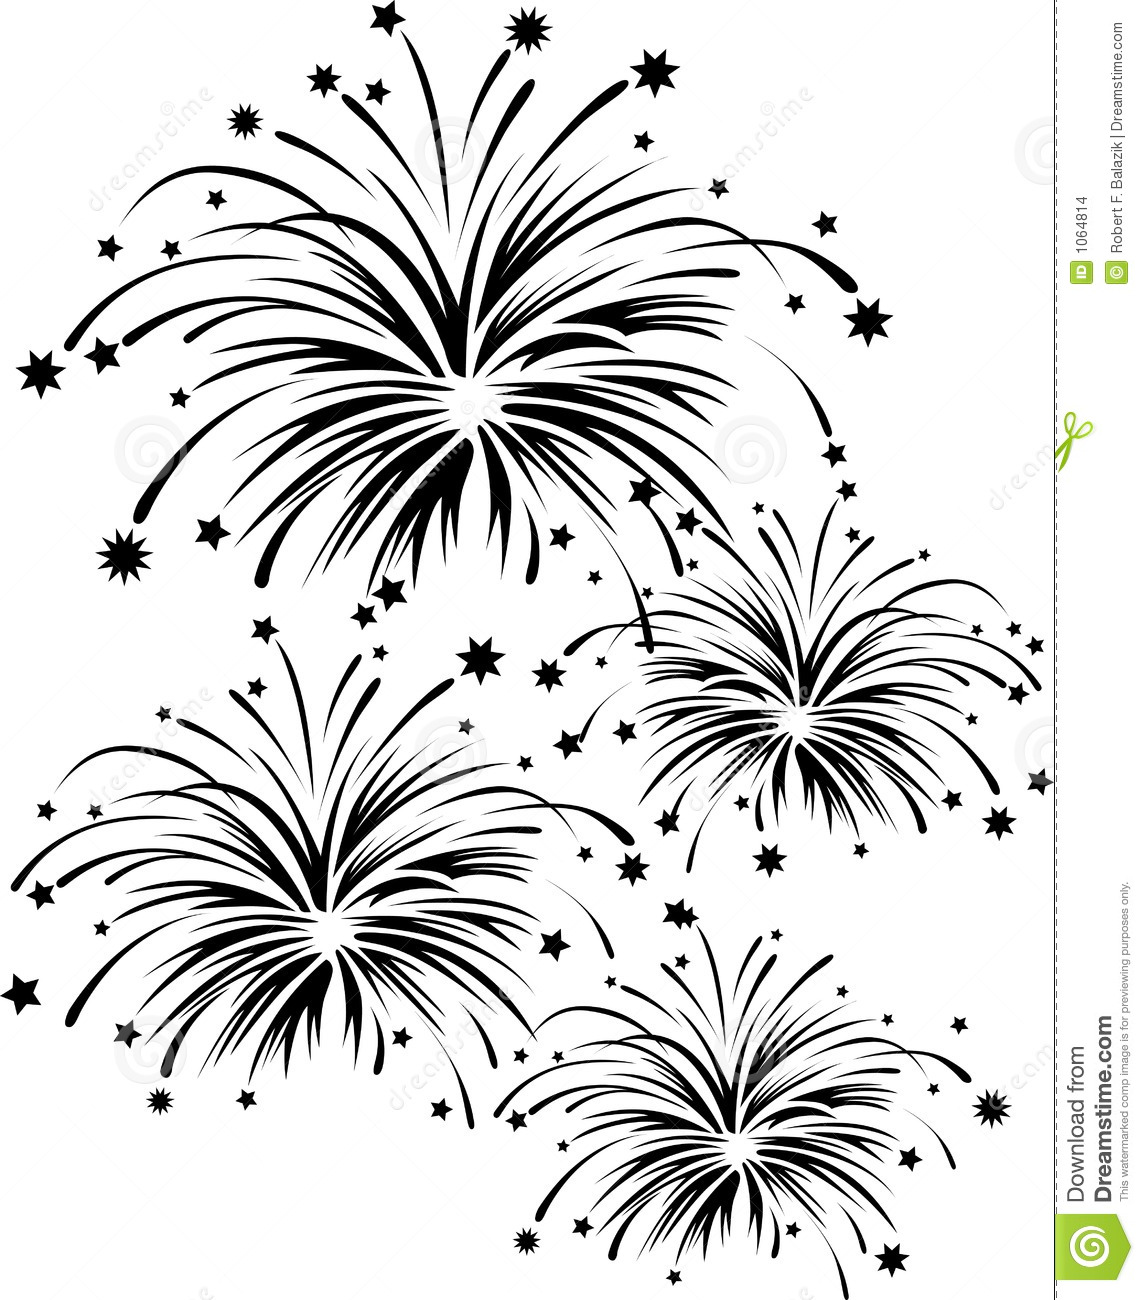 Raster Graphic Depicting A Fireworks Display